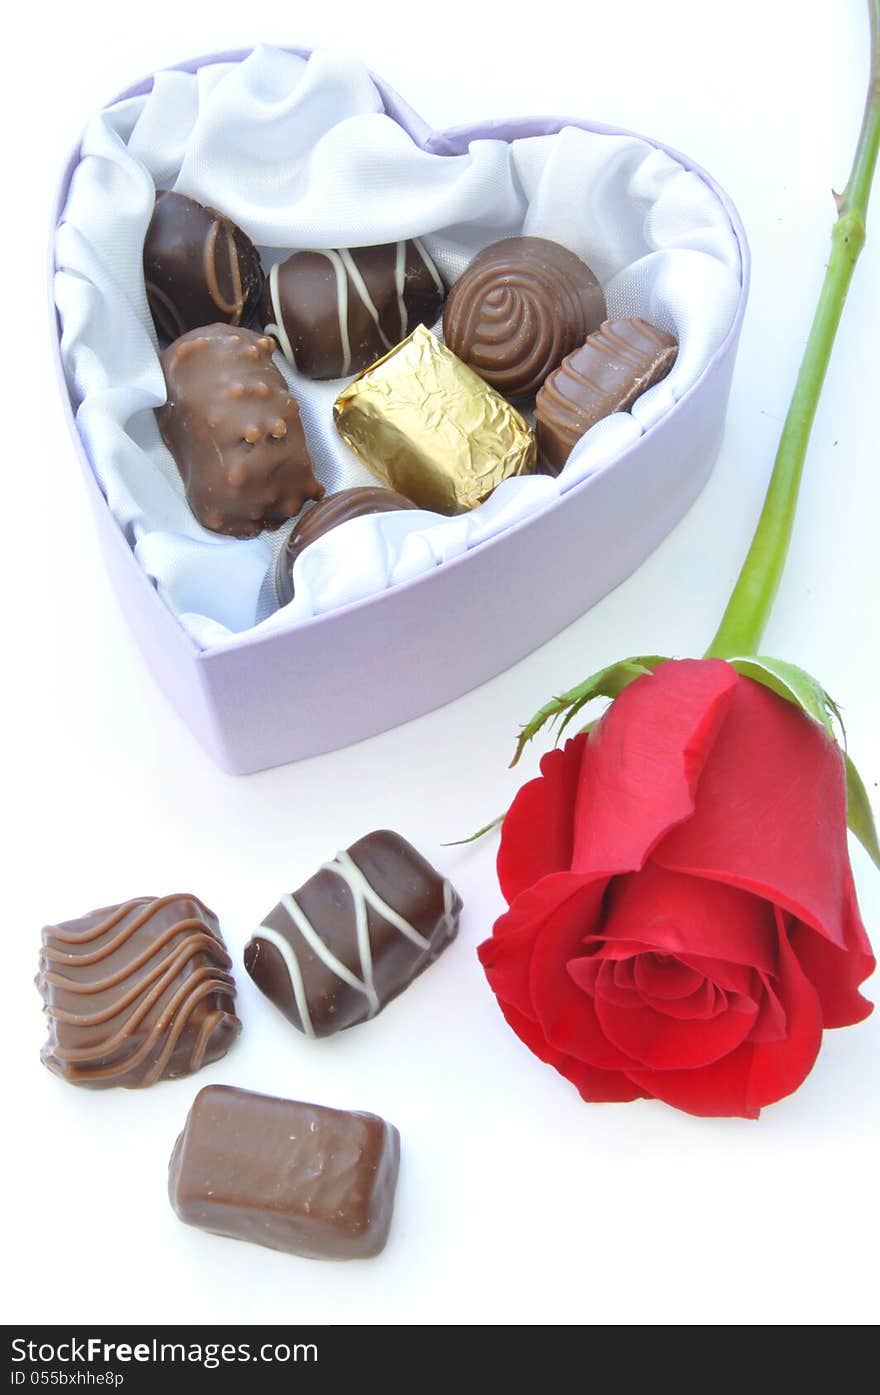 Assortment of chocolates inside a heartshaped box with a card and decorative red ribbon. Assortment of chocolates inside a heartshaped box with a card and decorative red ribbon